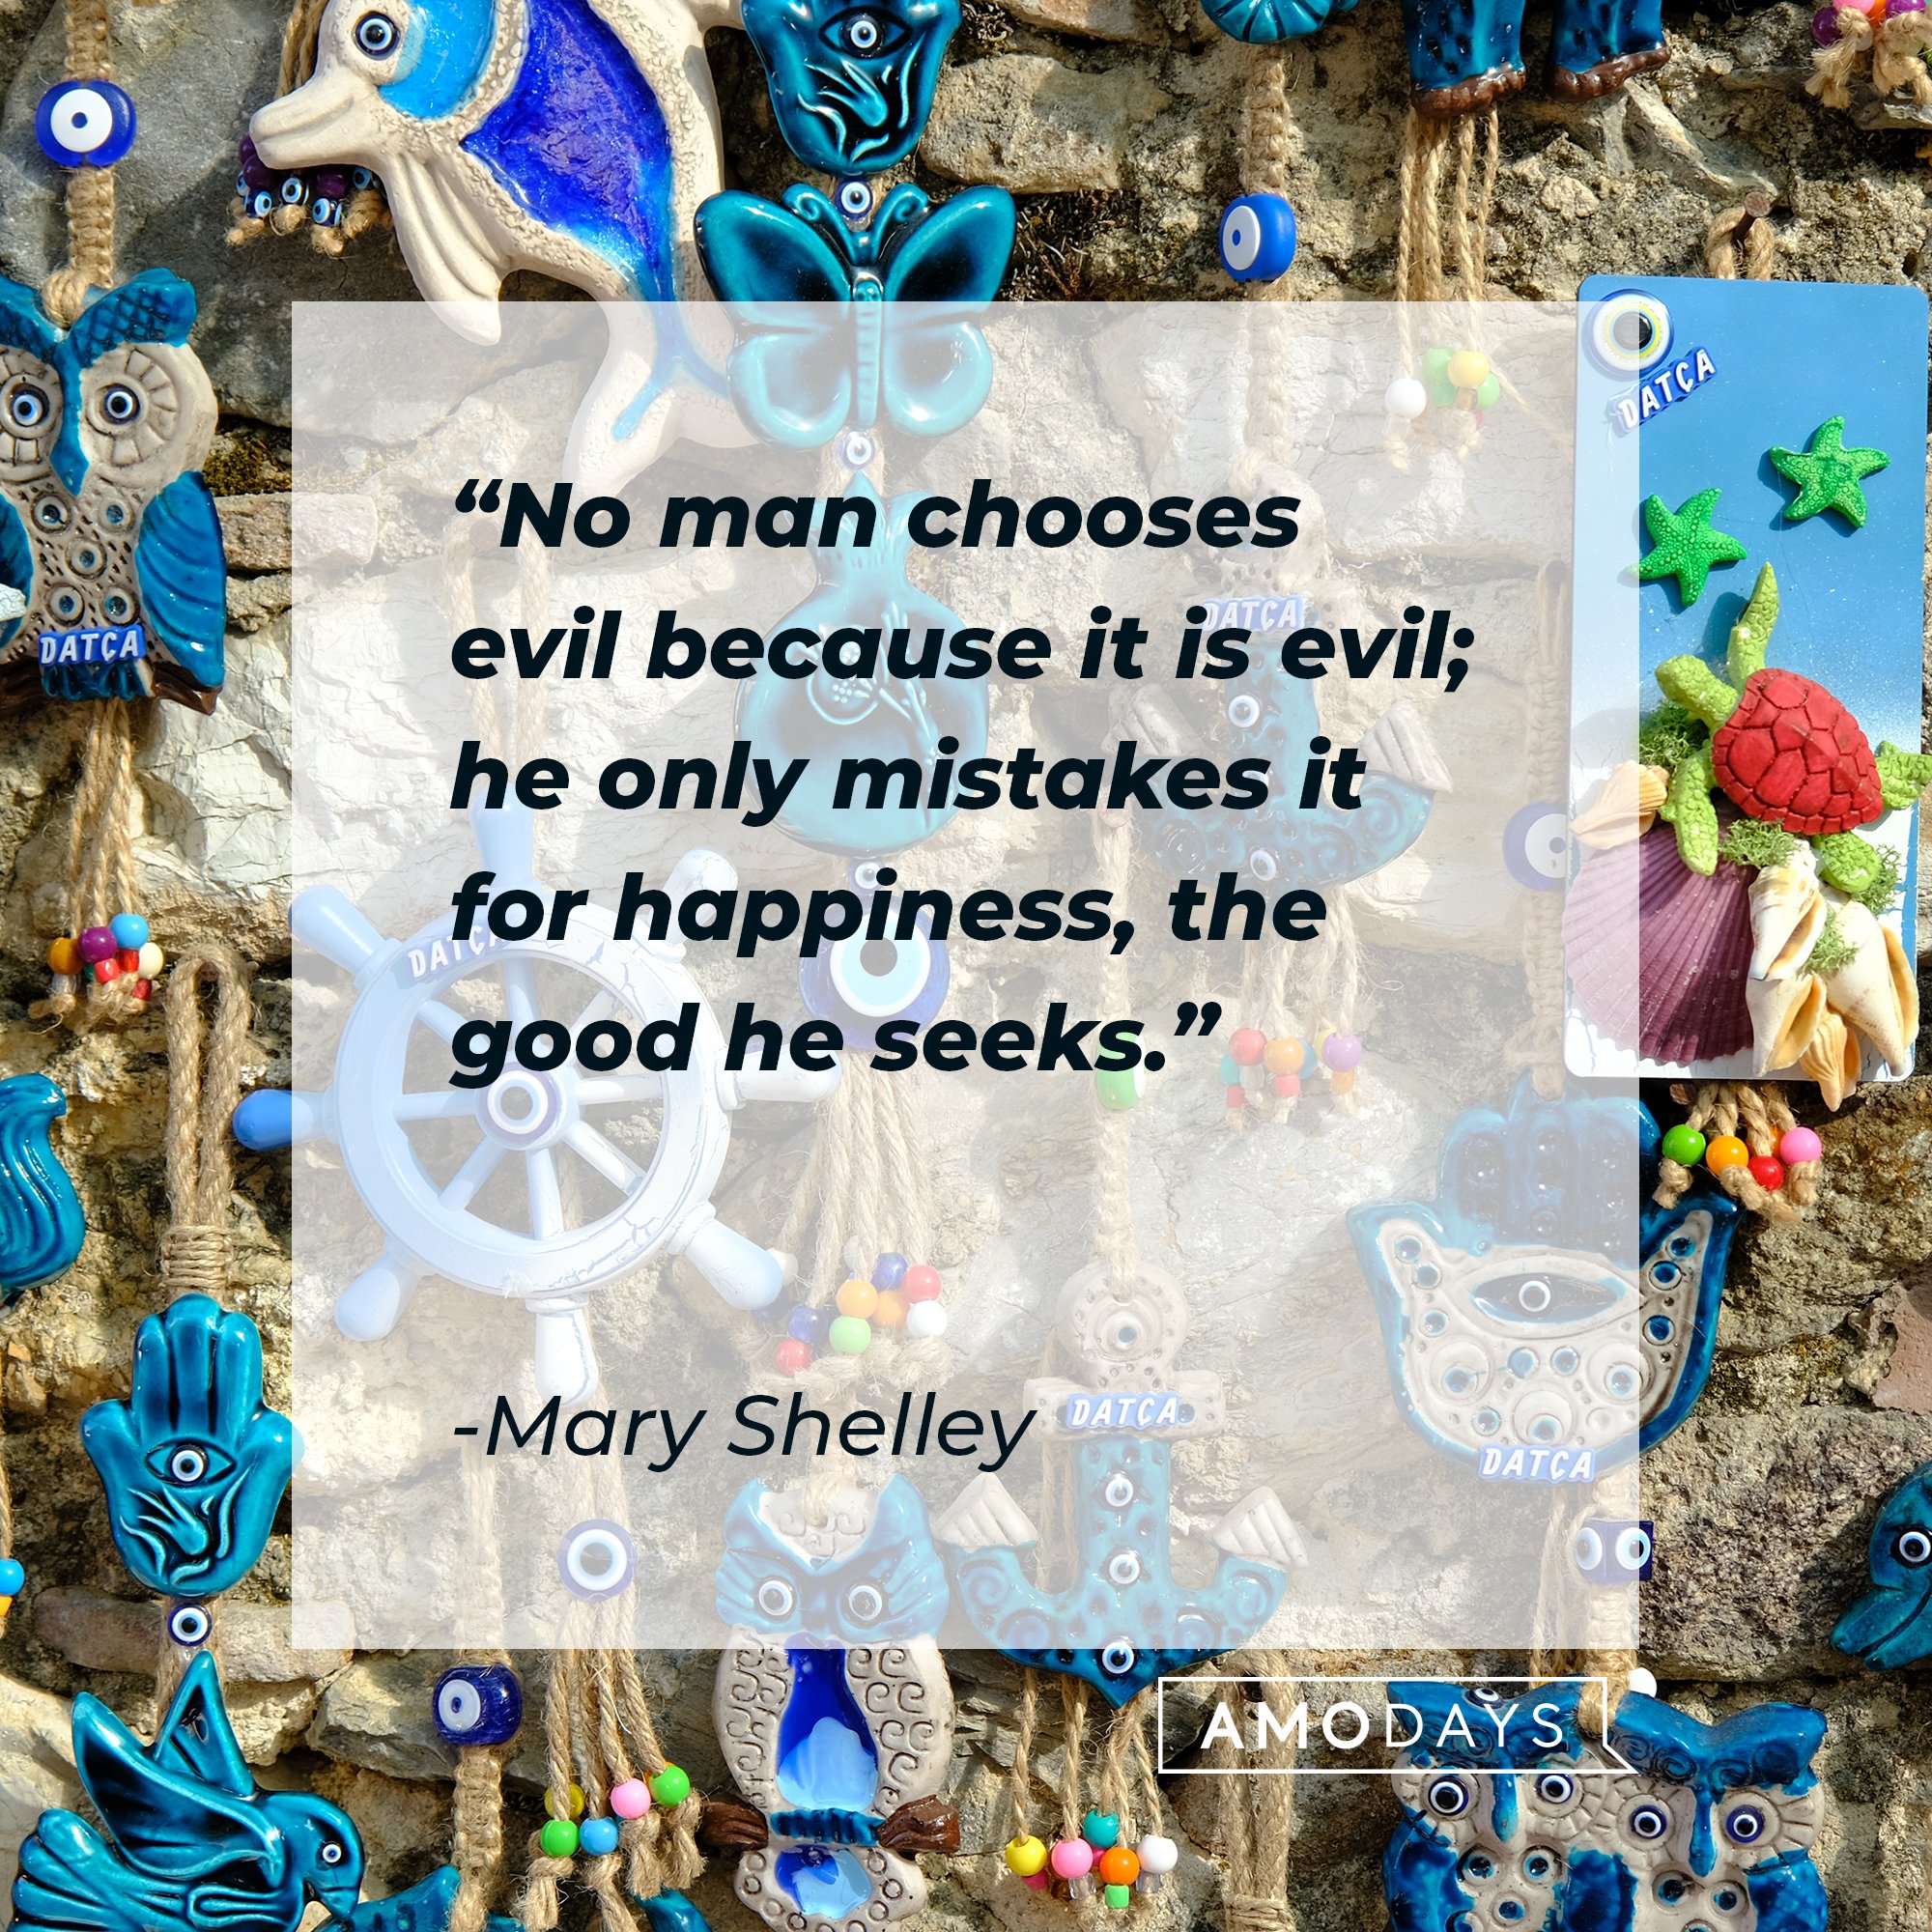 Mary Shelley’s quote: "No man chooses evil because it is evil; he only mistakes it for happiness, the good he seeks." | Image: AmoDays